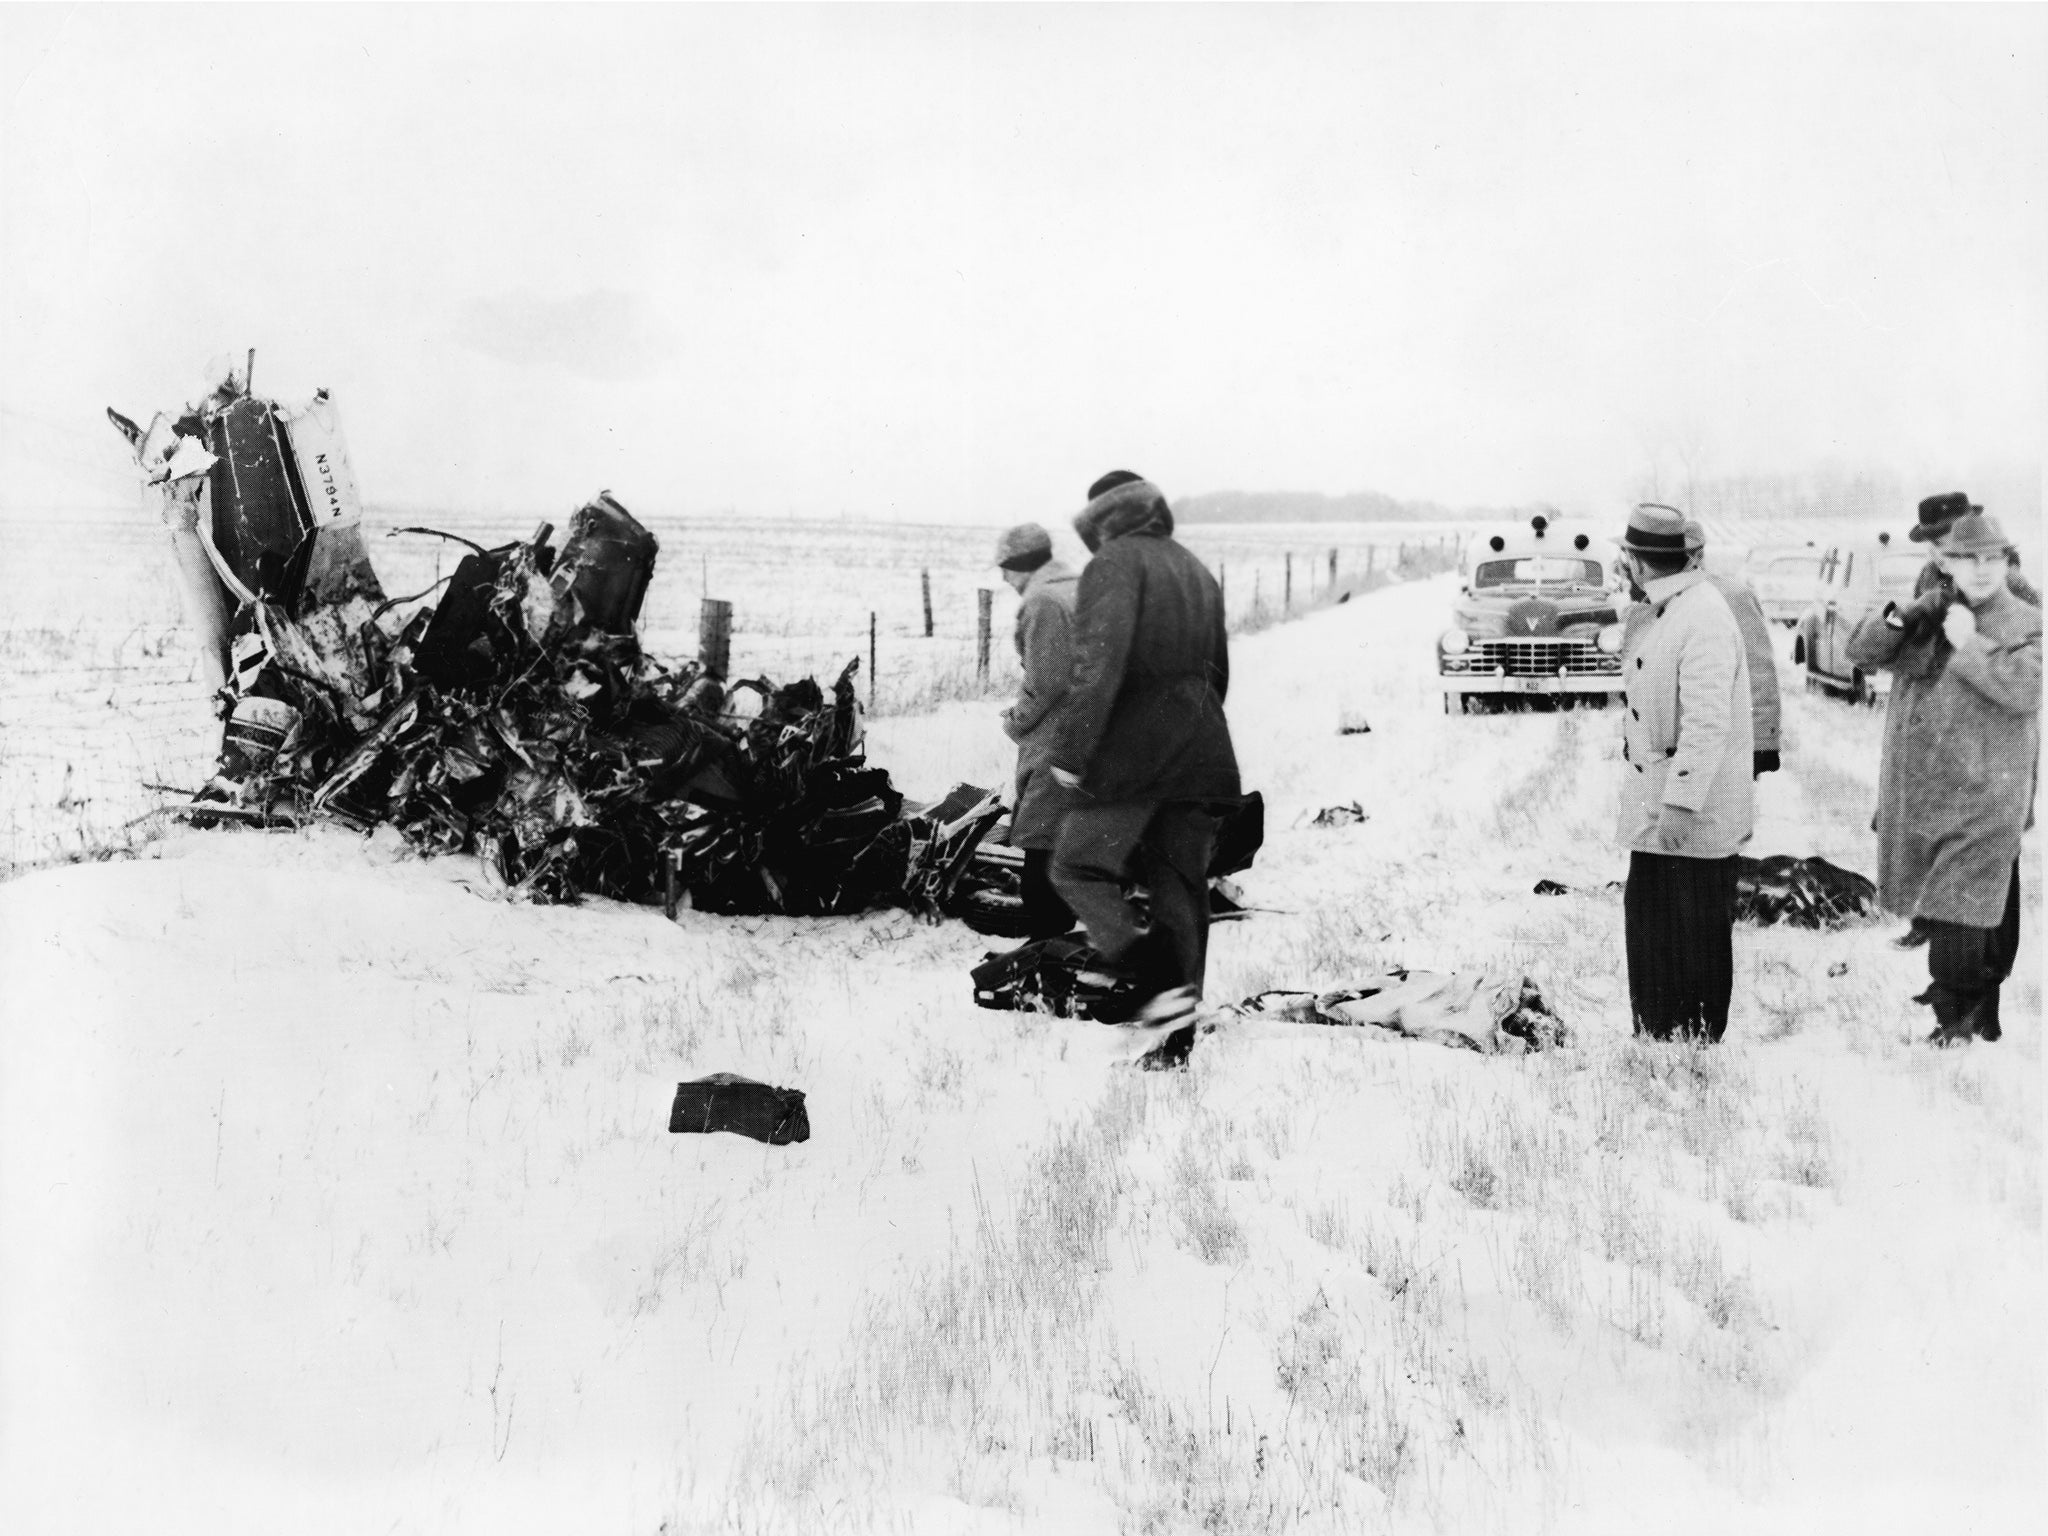 The wreckage of the Beechcraft Bonanza airplane in a snowy field outside of Clear Lake, Iowa, on 3 February 1959